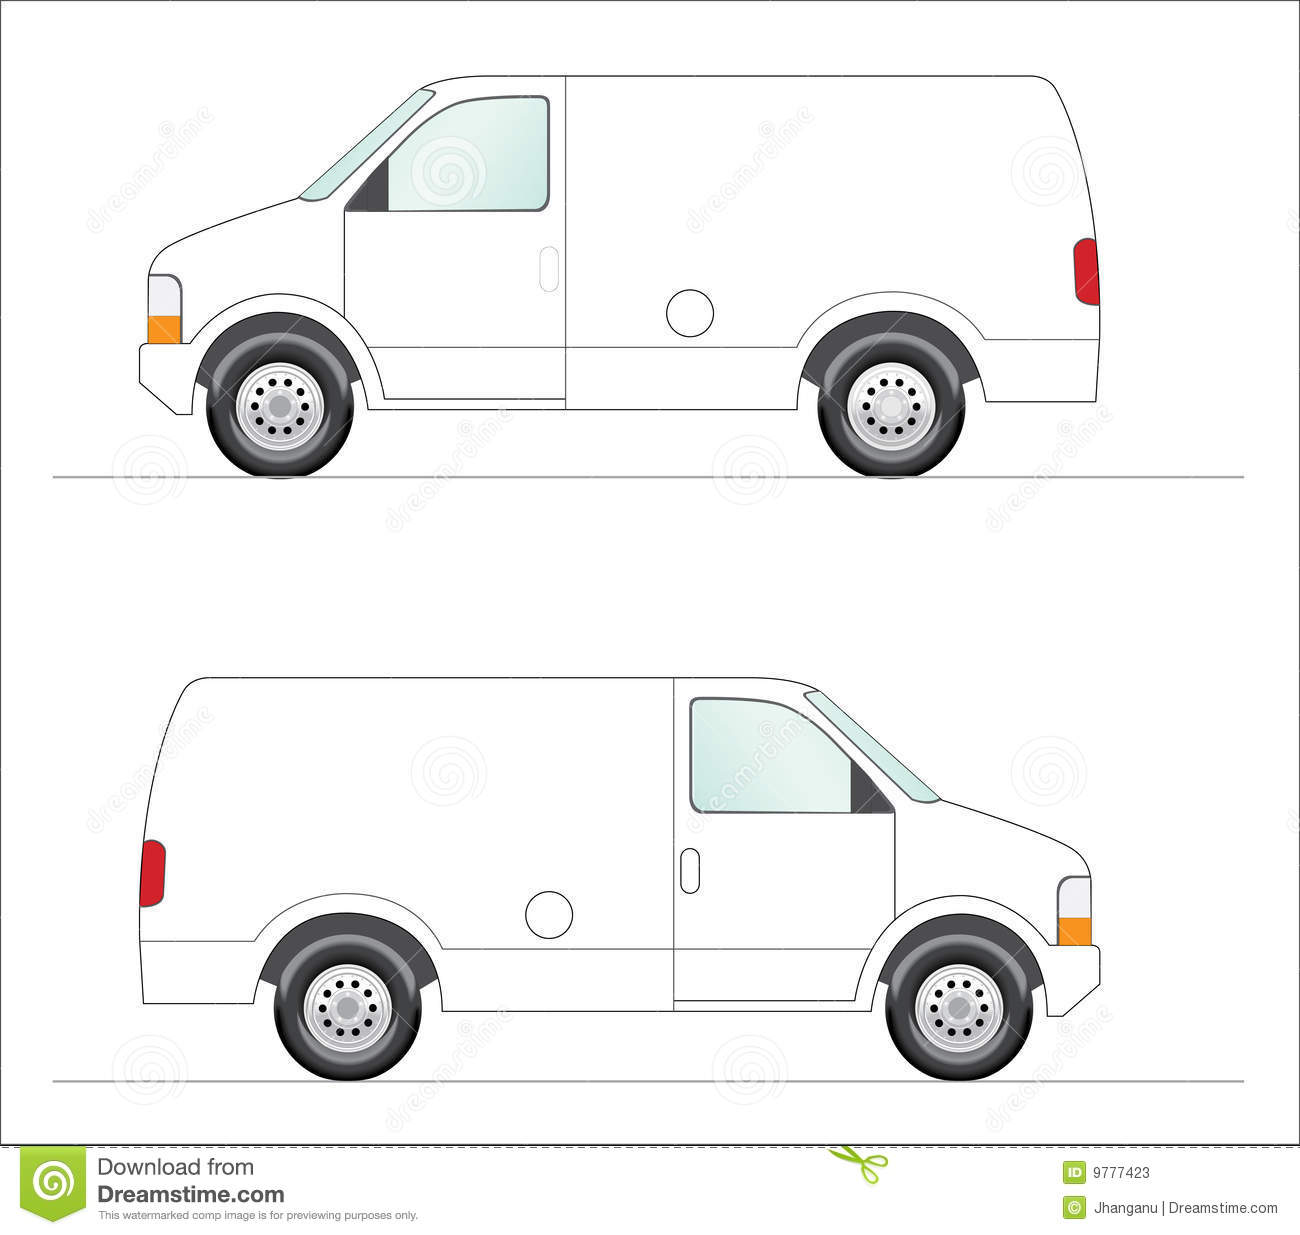 This Is A Clipart Of A White Panel Van Illustration  Colors Can Be